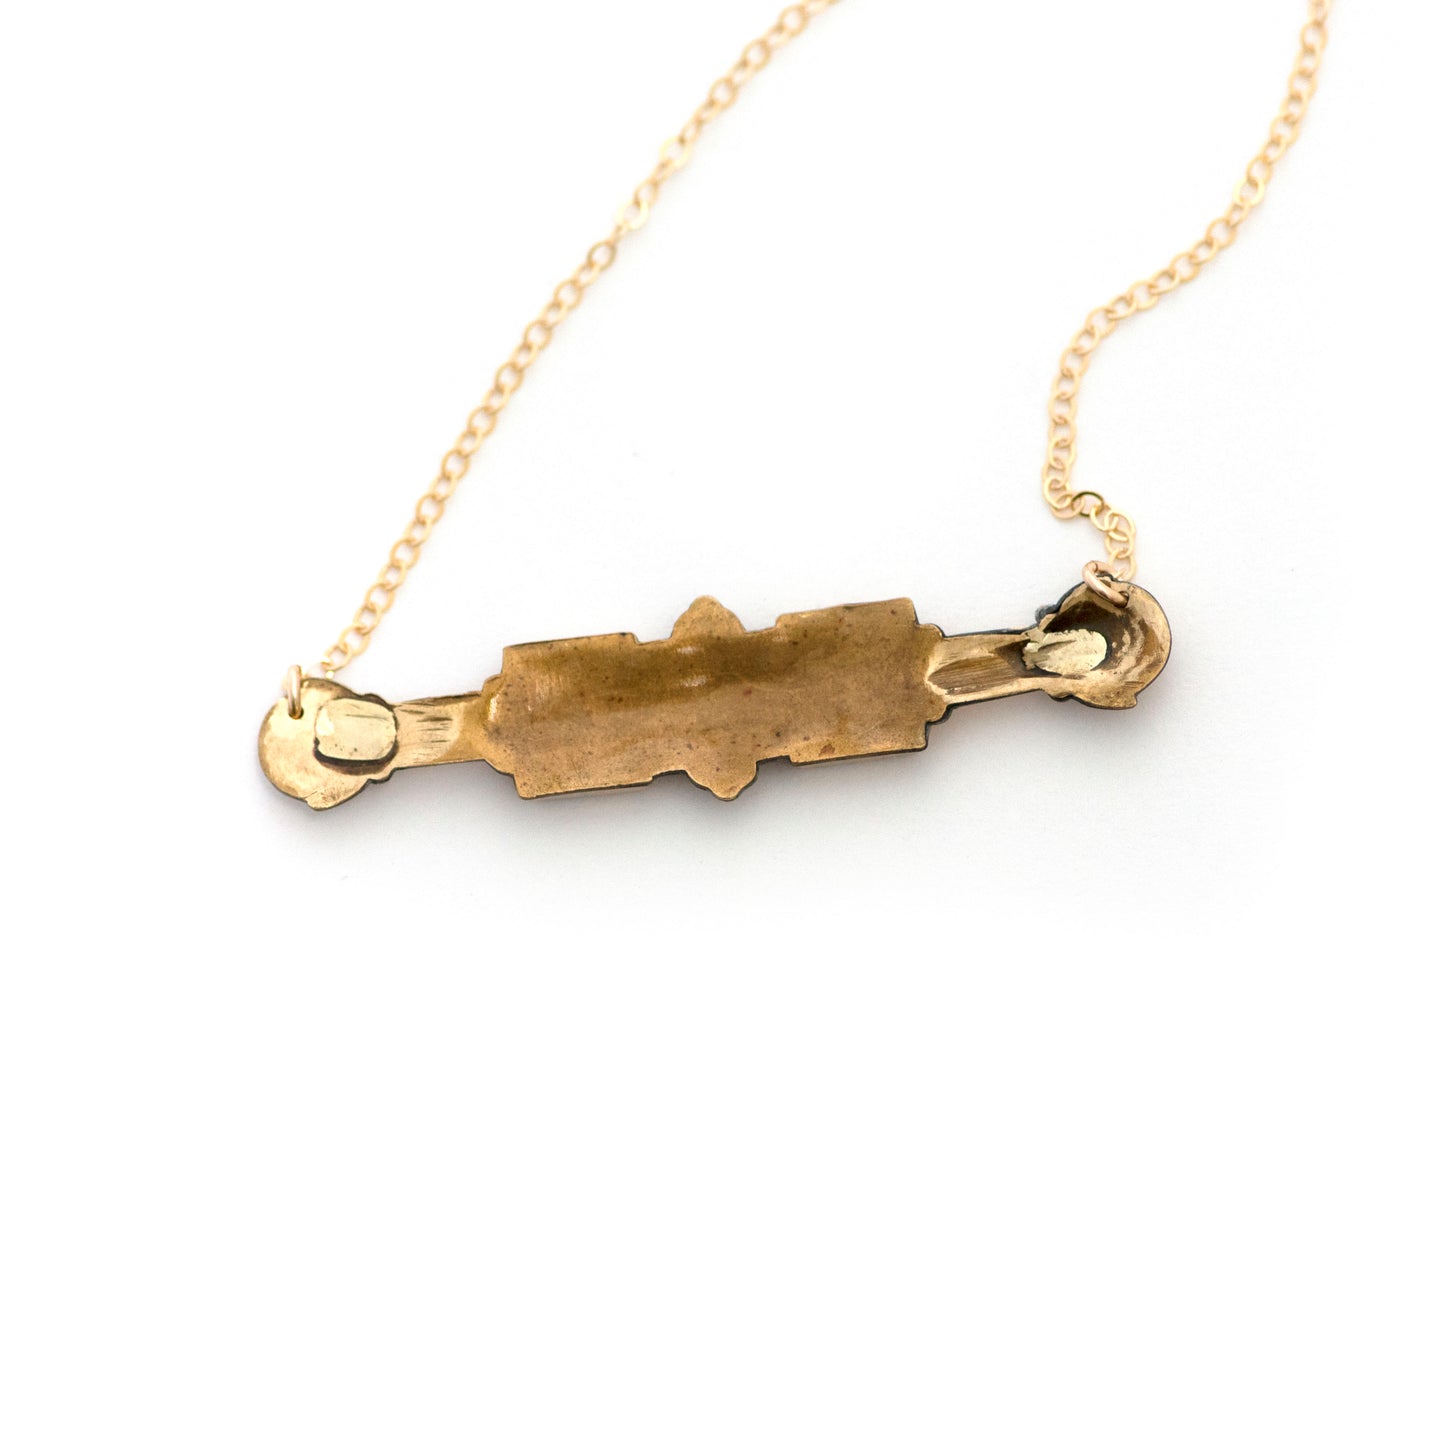 The back of an Antique Victorian Gold Filled Bar Pin Necklace